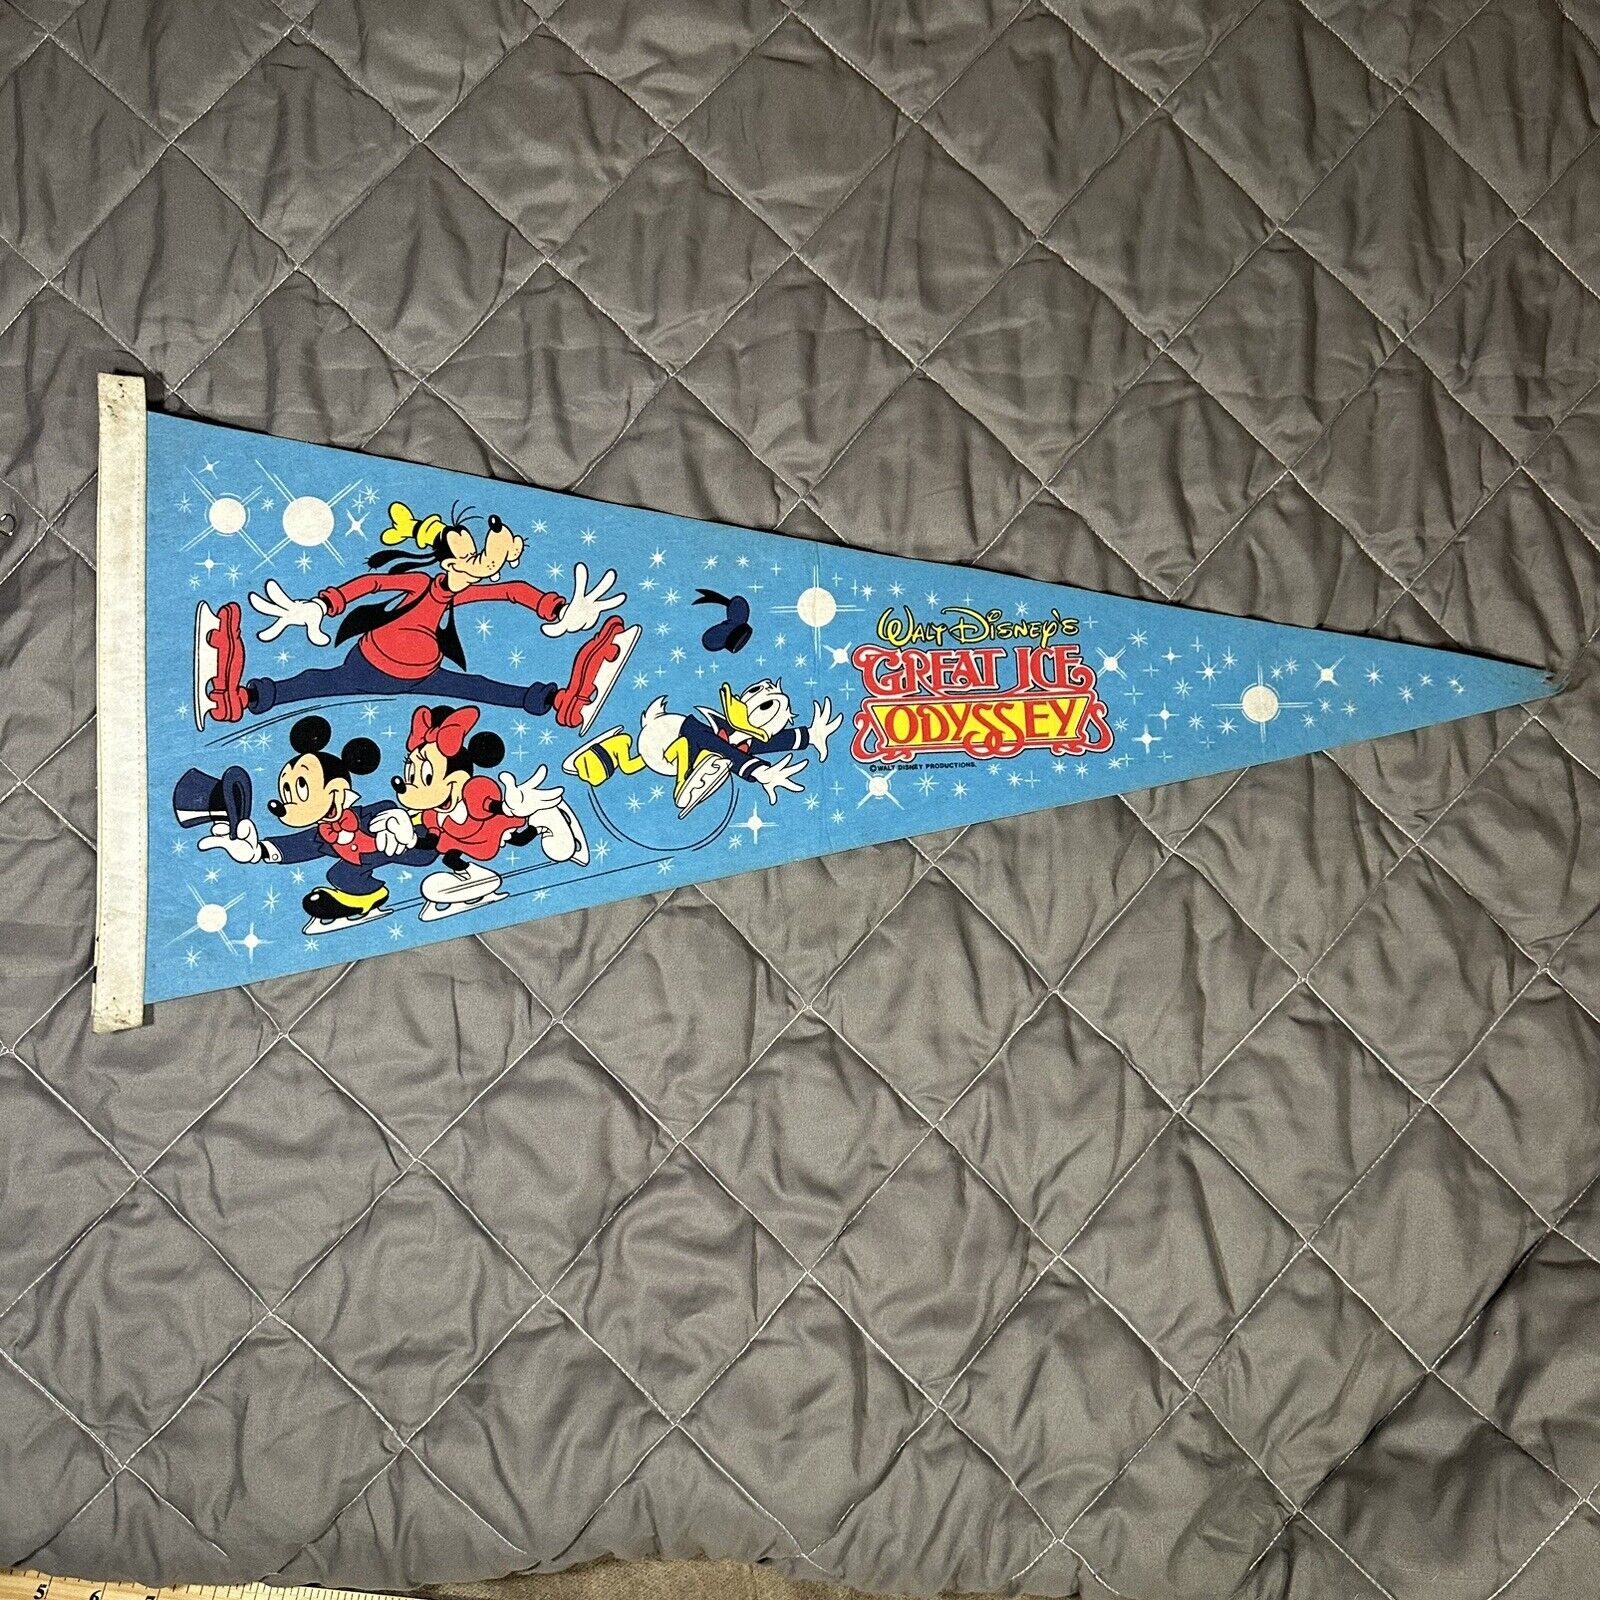 Vintage Disney on Ice Pennant Great Ice Odyssey Mickey Mouse Goofy Donald Duck